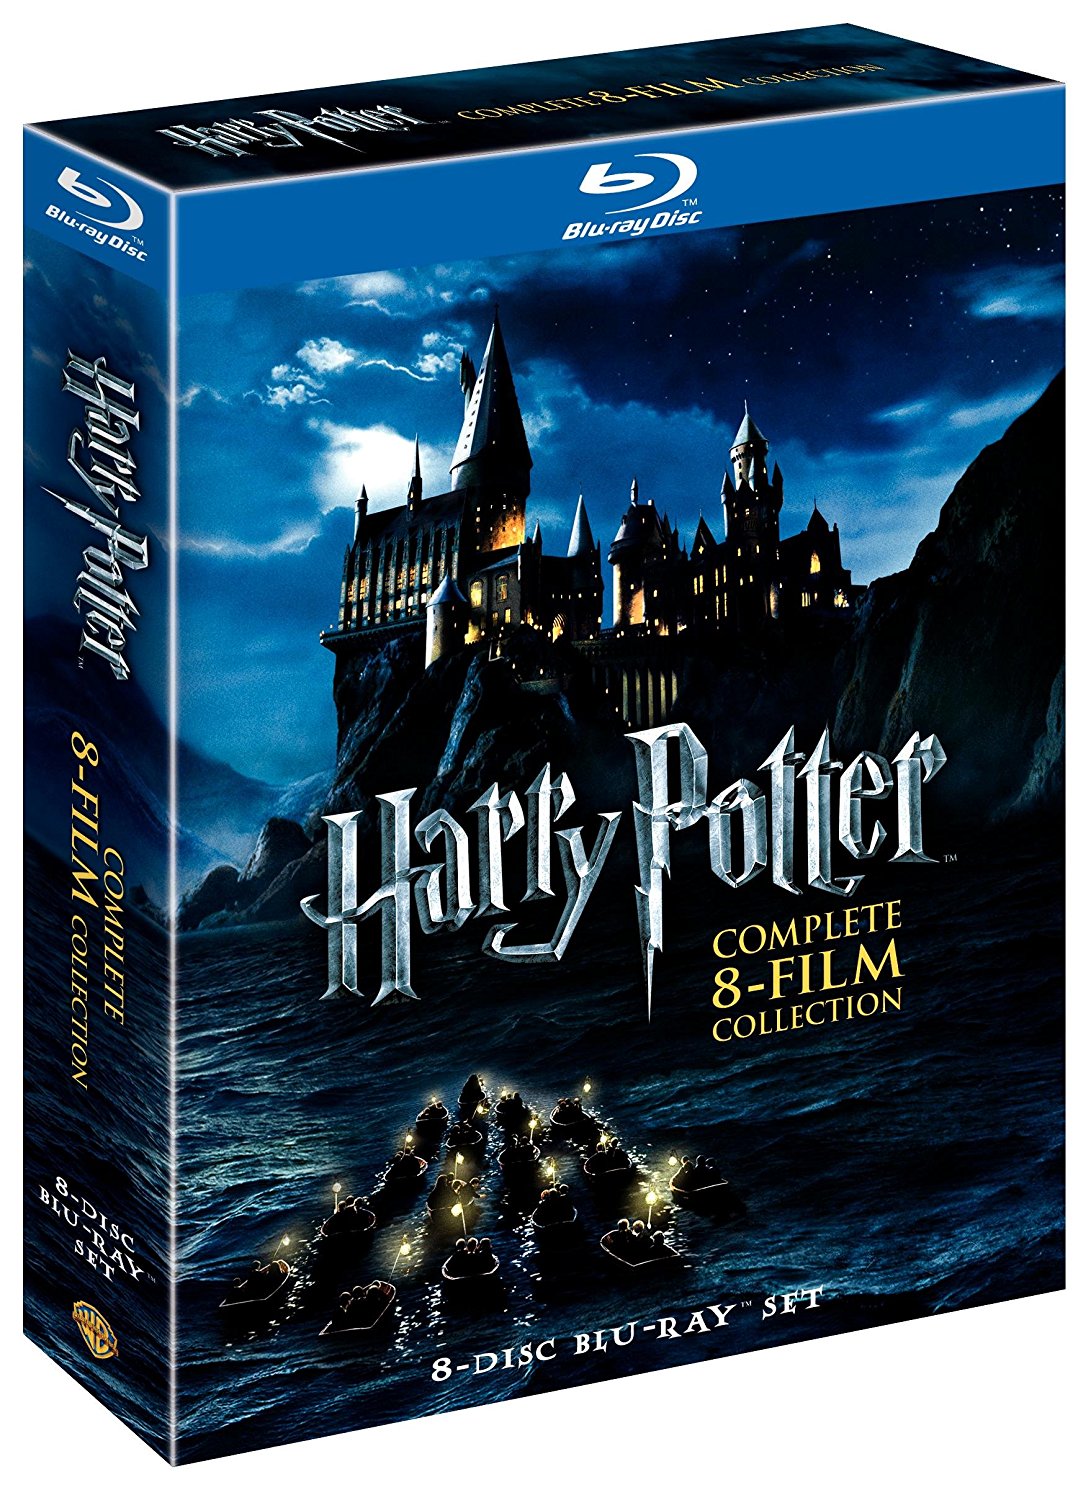 Harry Potter: Complete 8-Film Collection On DVD + Blu-ray $29.99